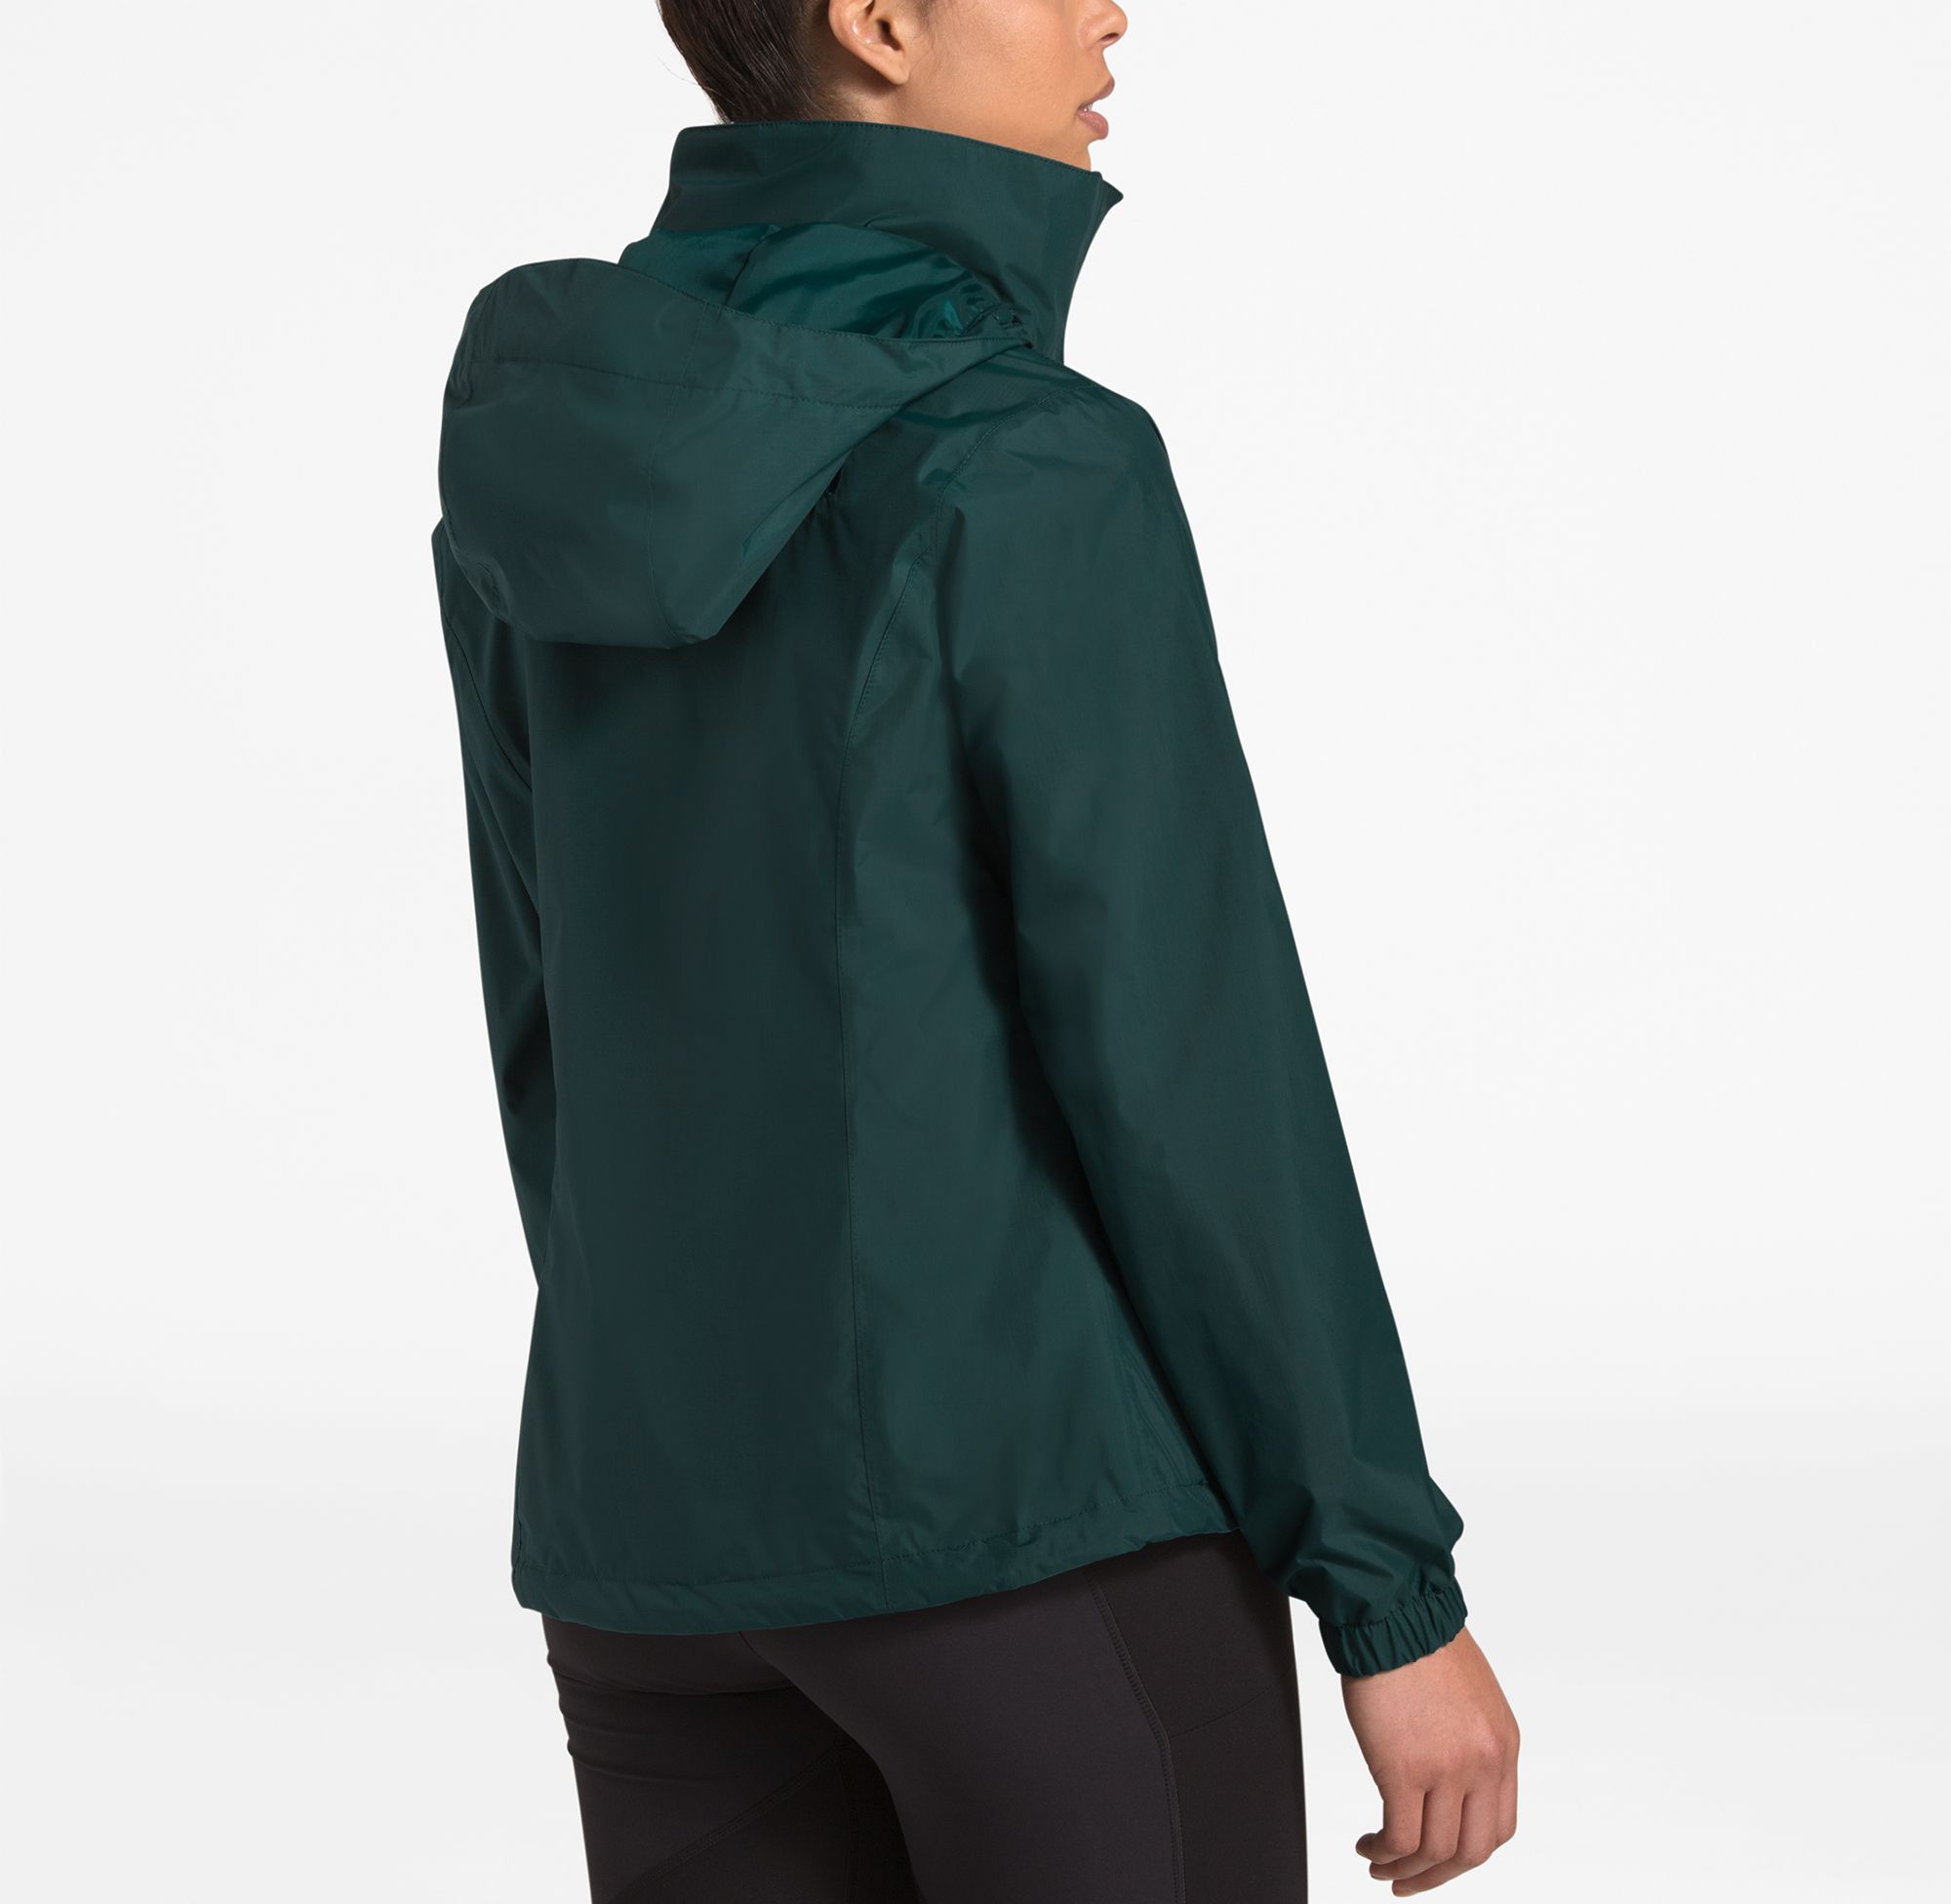 the north face women's resolve 2 waterproof jacket